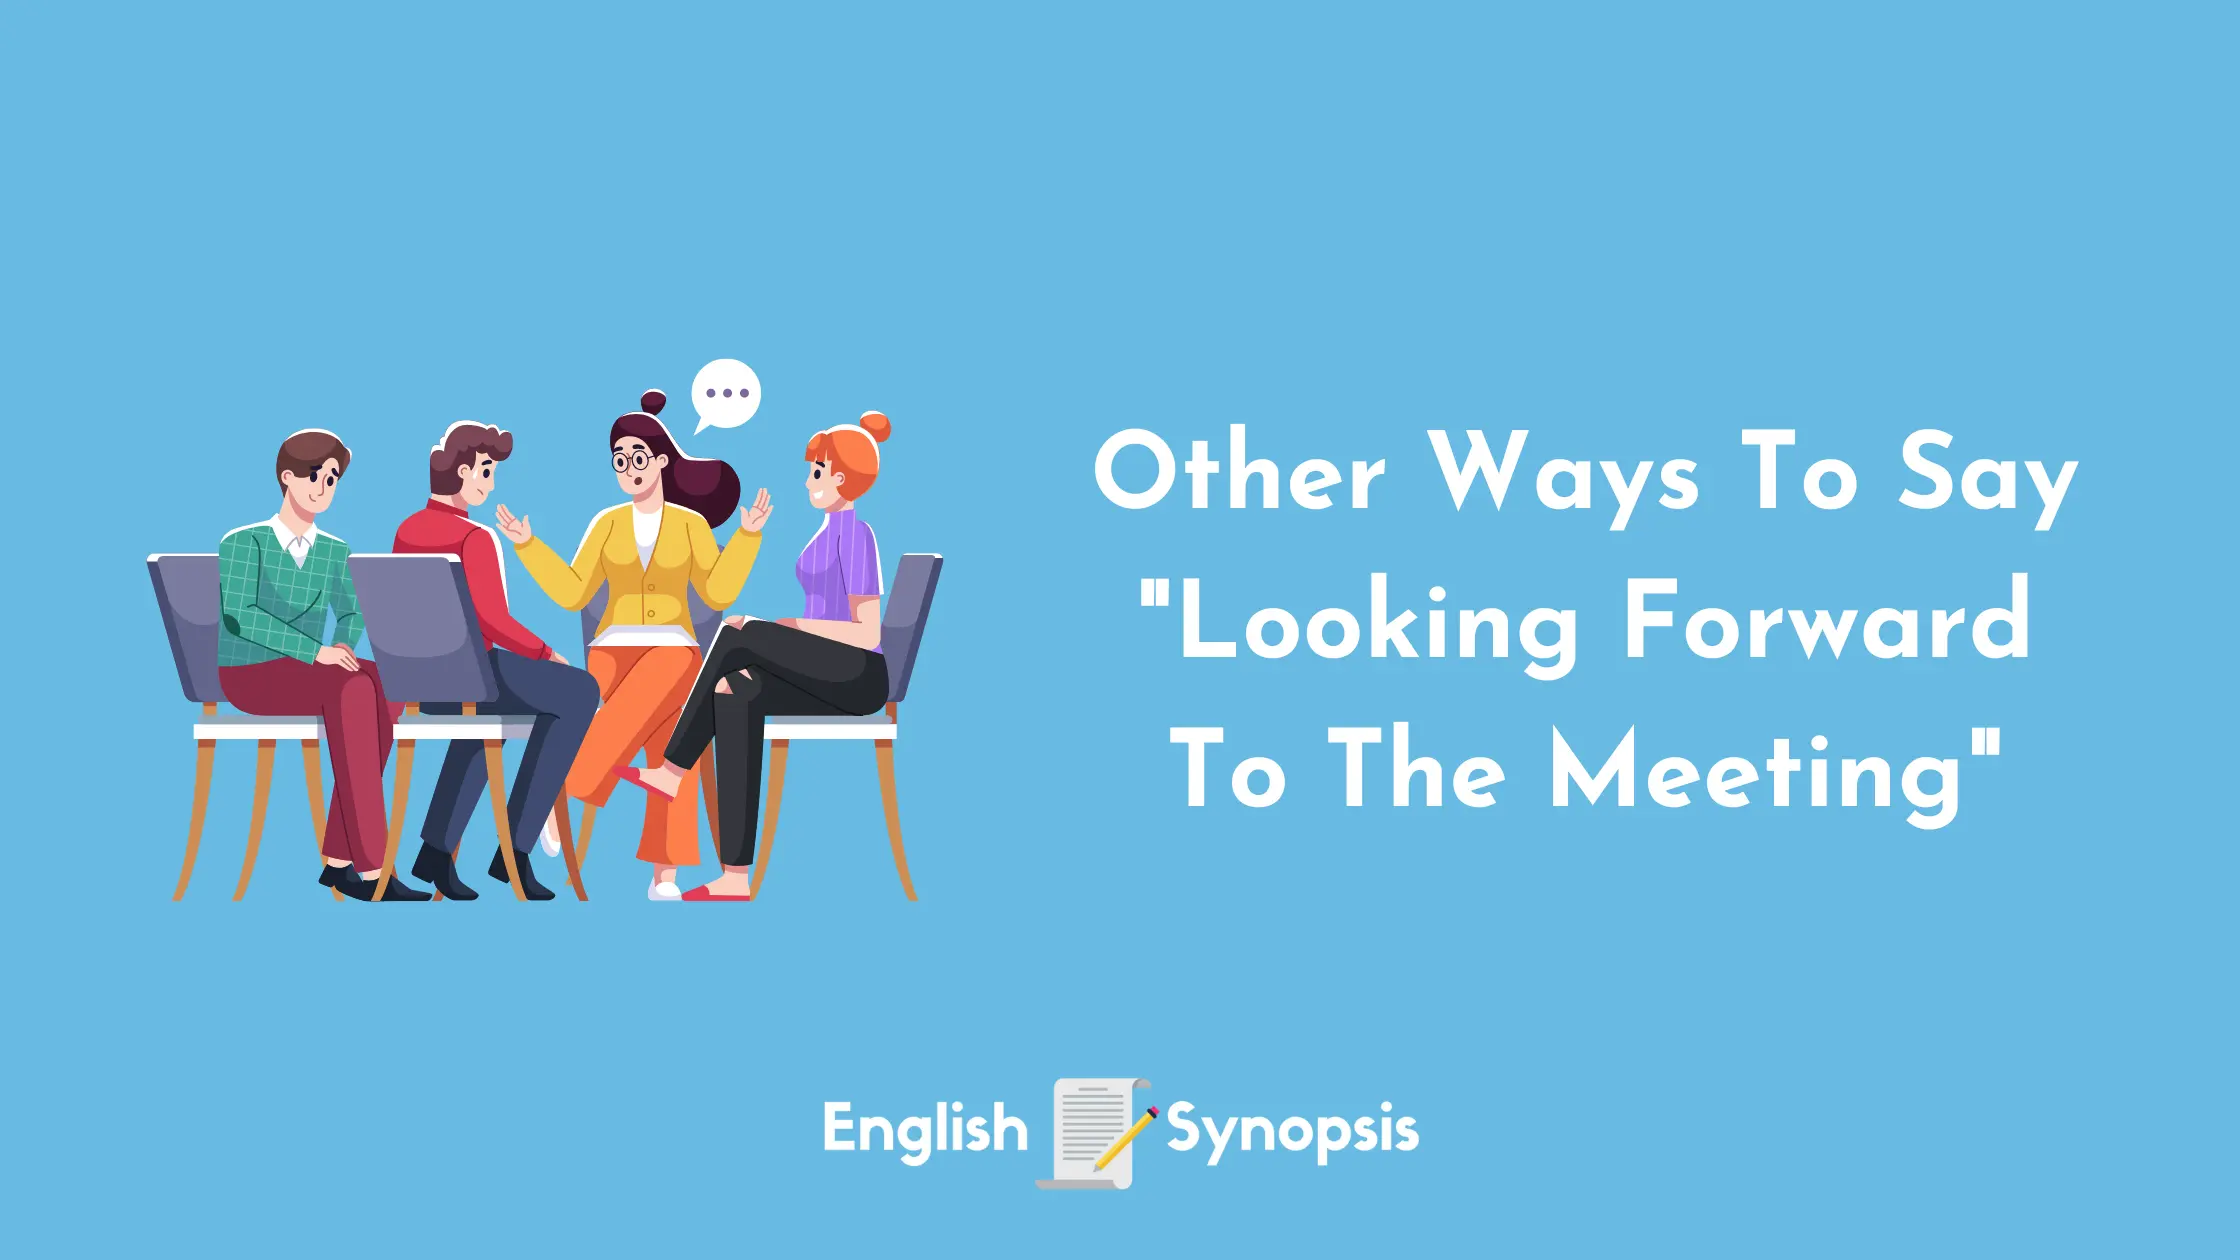 Other Ways To Say "Looking Forward To The Meeting"